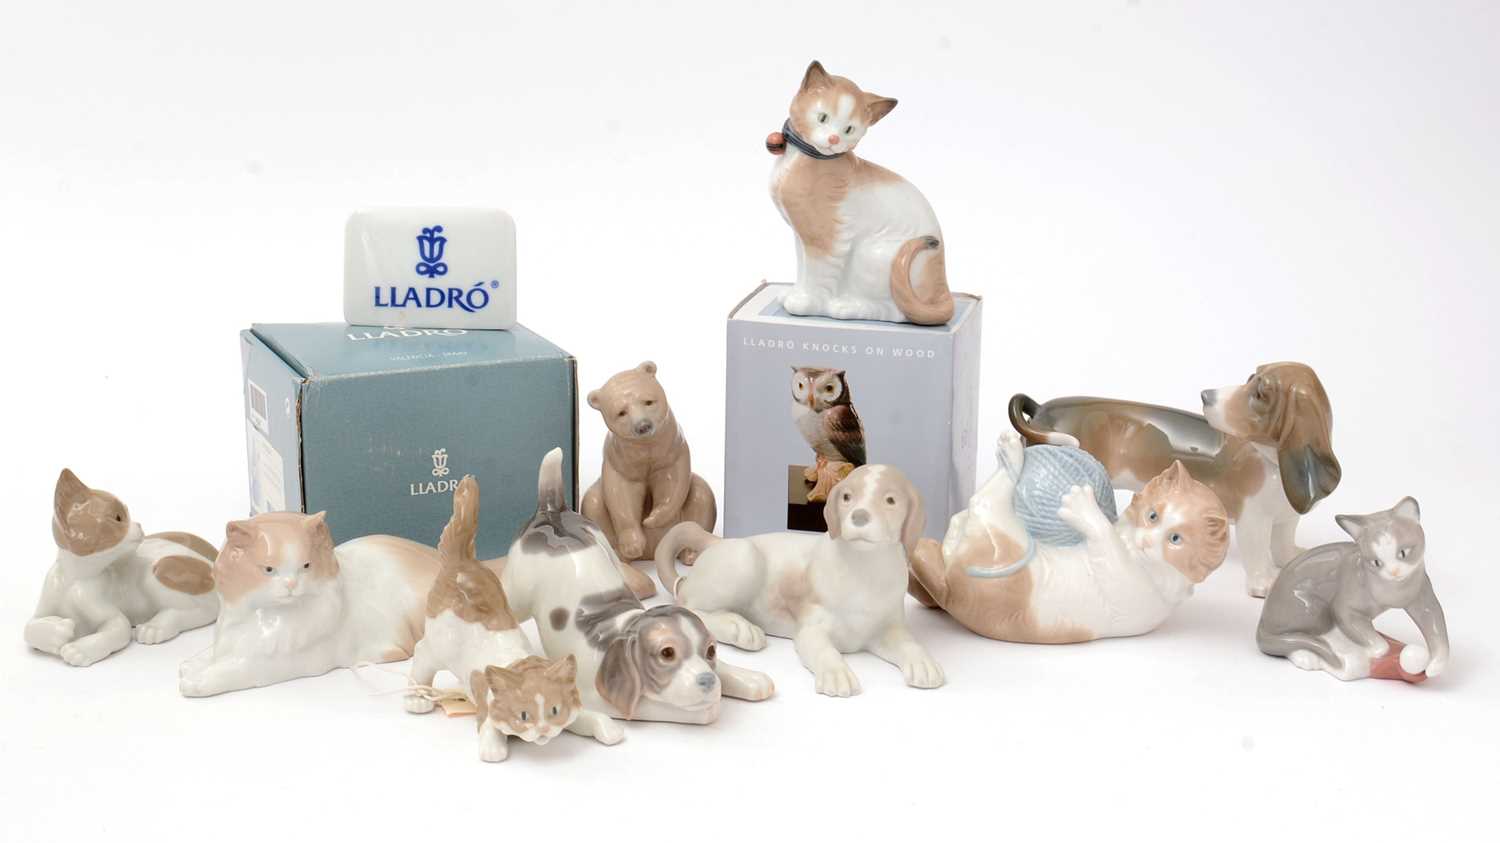 Four Lladro figures; five Nao figures; and a Lladro display sign.